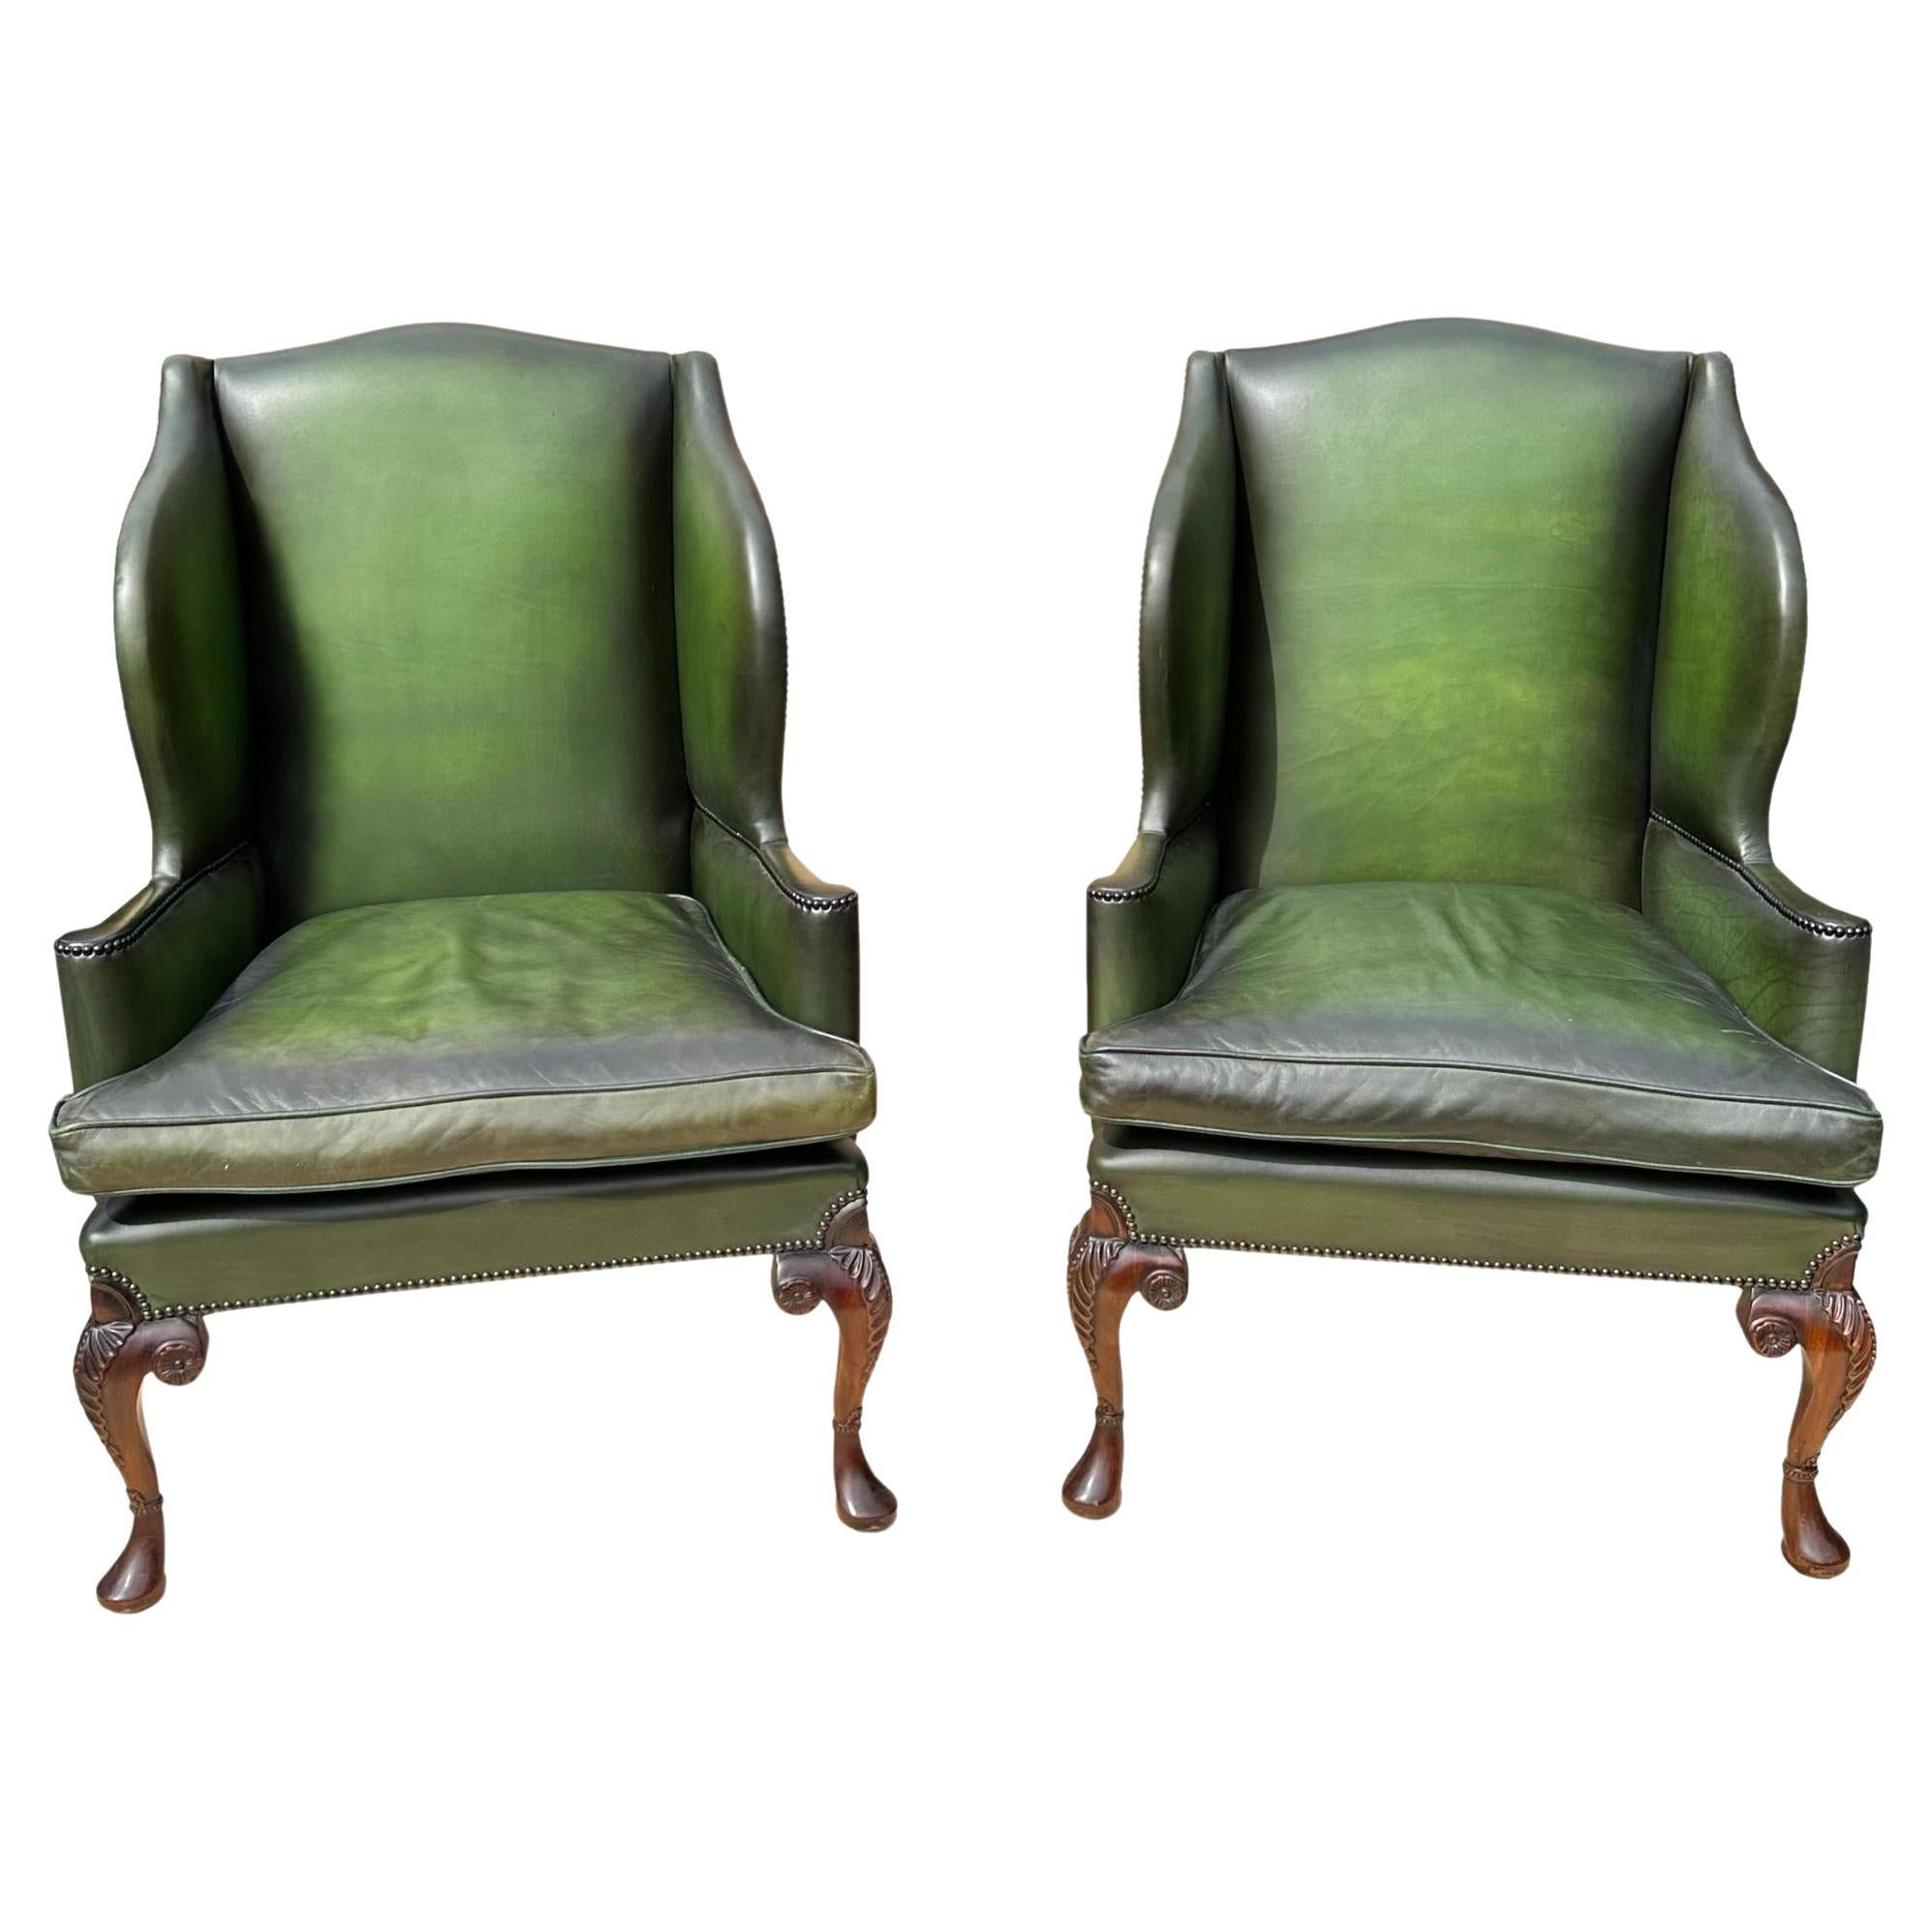 Pair of Edwardian Green Leather Wing Back Chairs, English, ca. 1920. For Sale